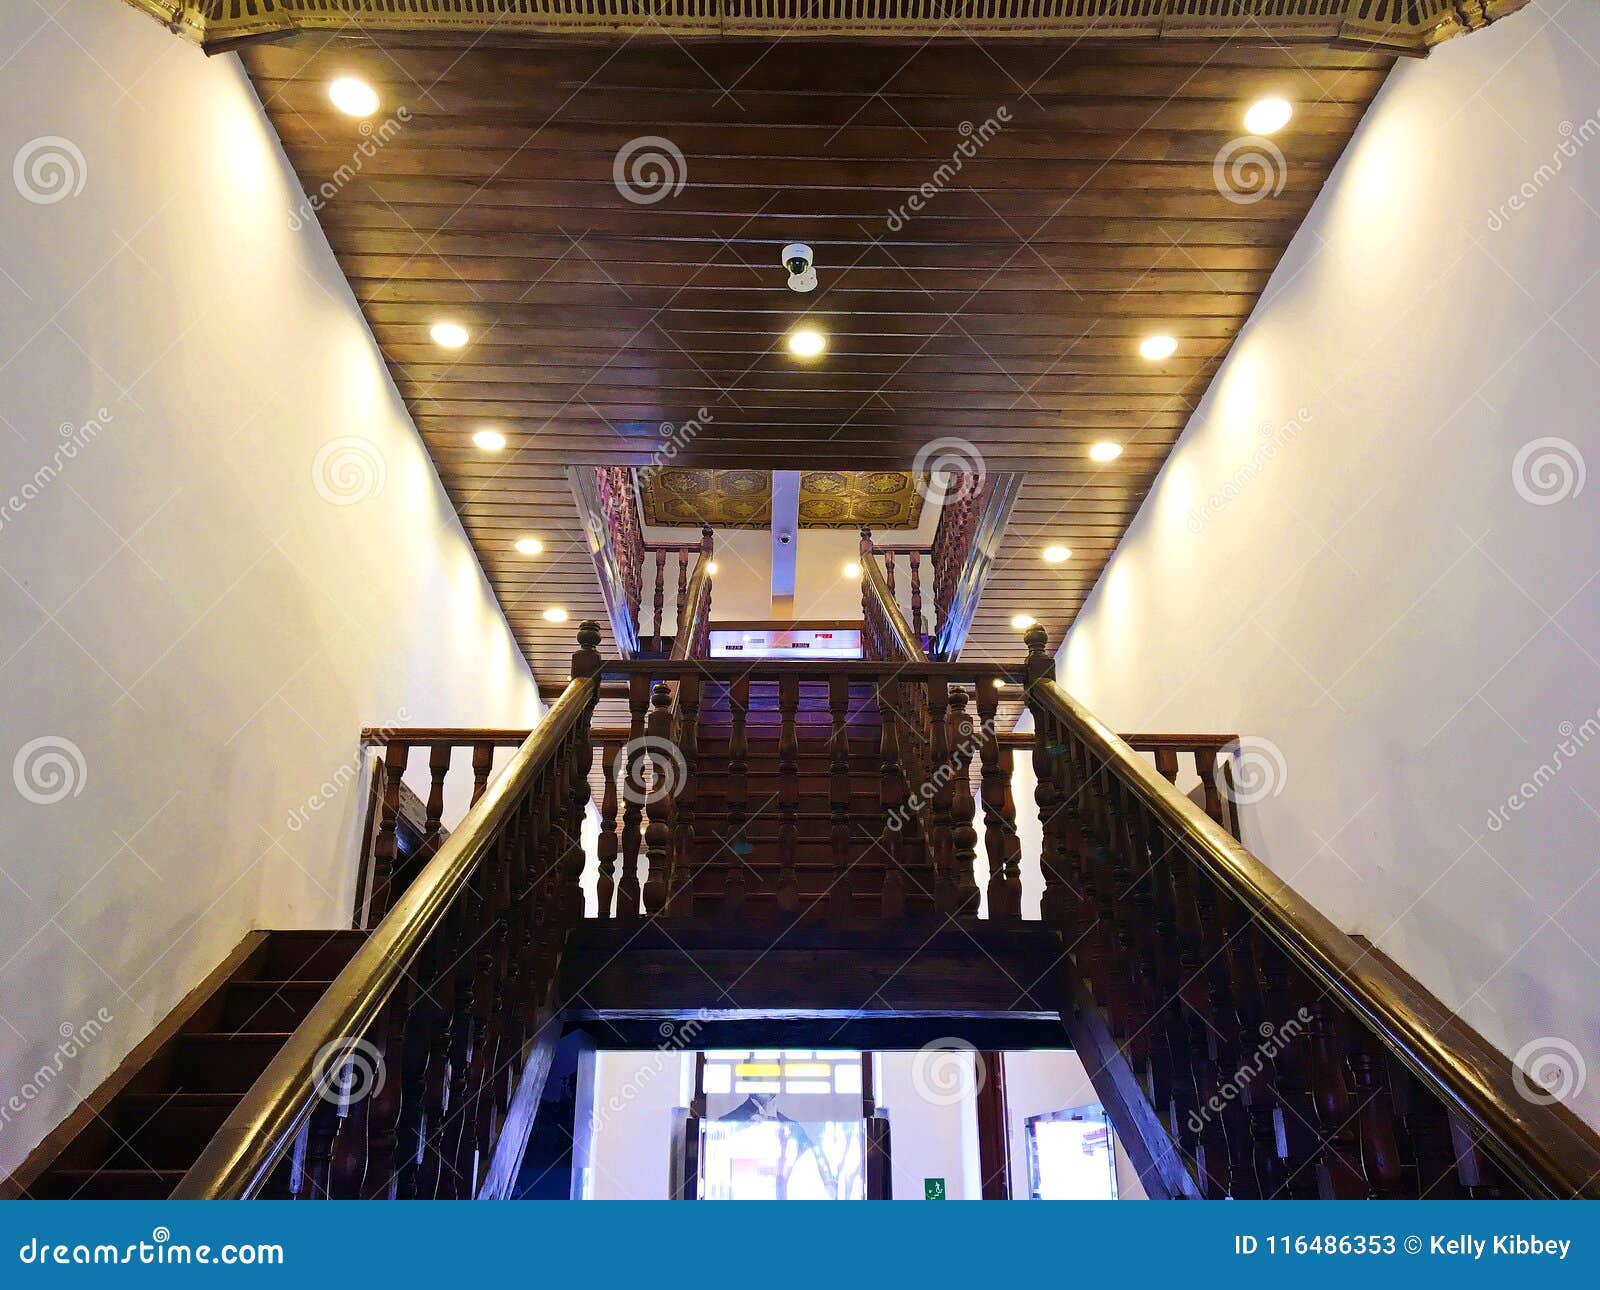 wooden staircase and ceiling in historic building, cuenca ecuador